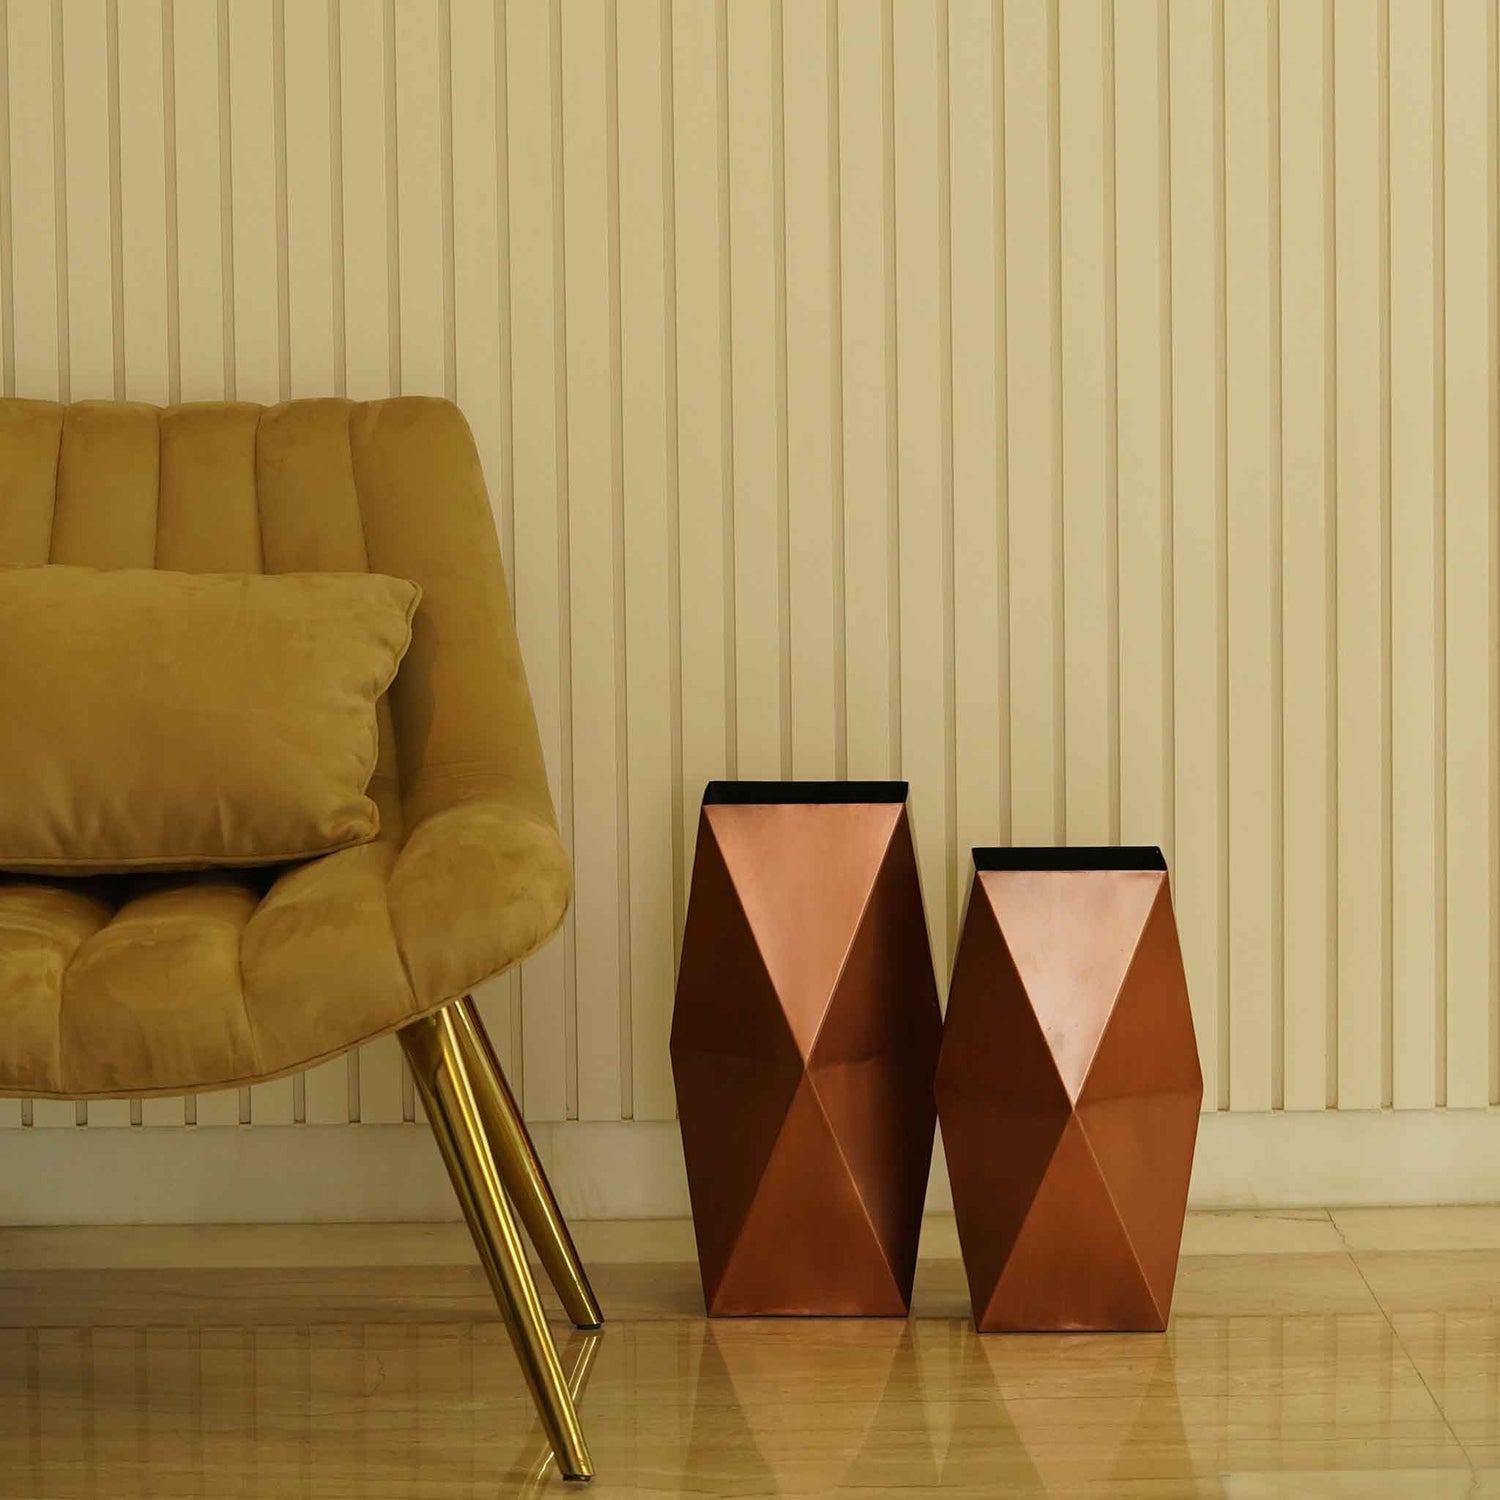 Two large hexagonal metallic vases in copper finish placed on the floor next to a chair.